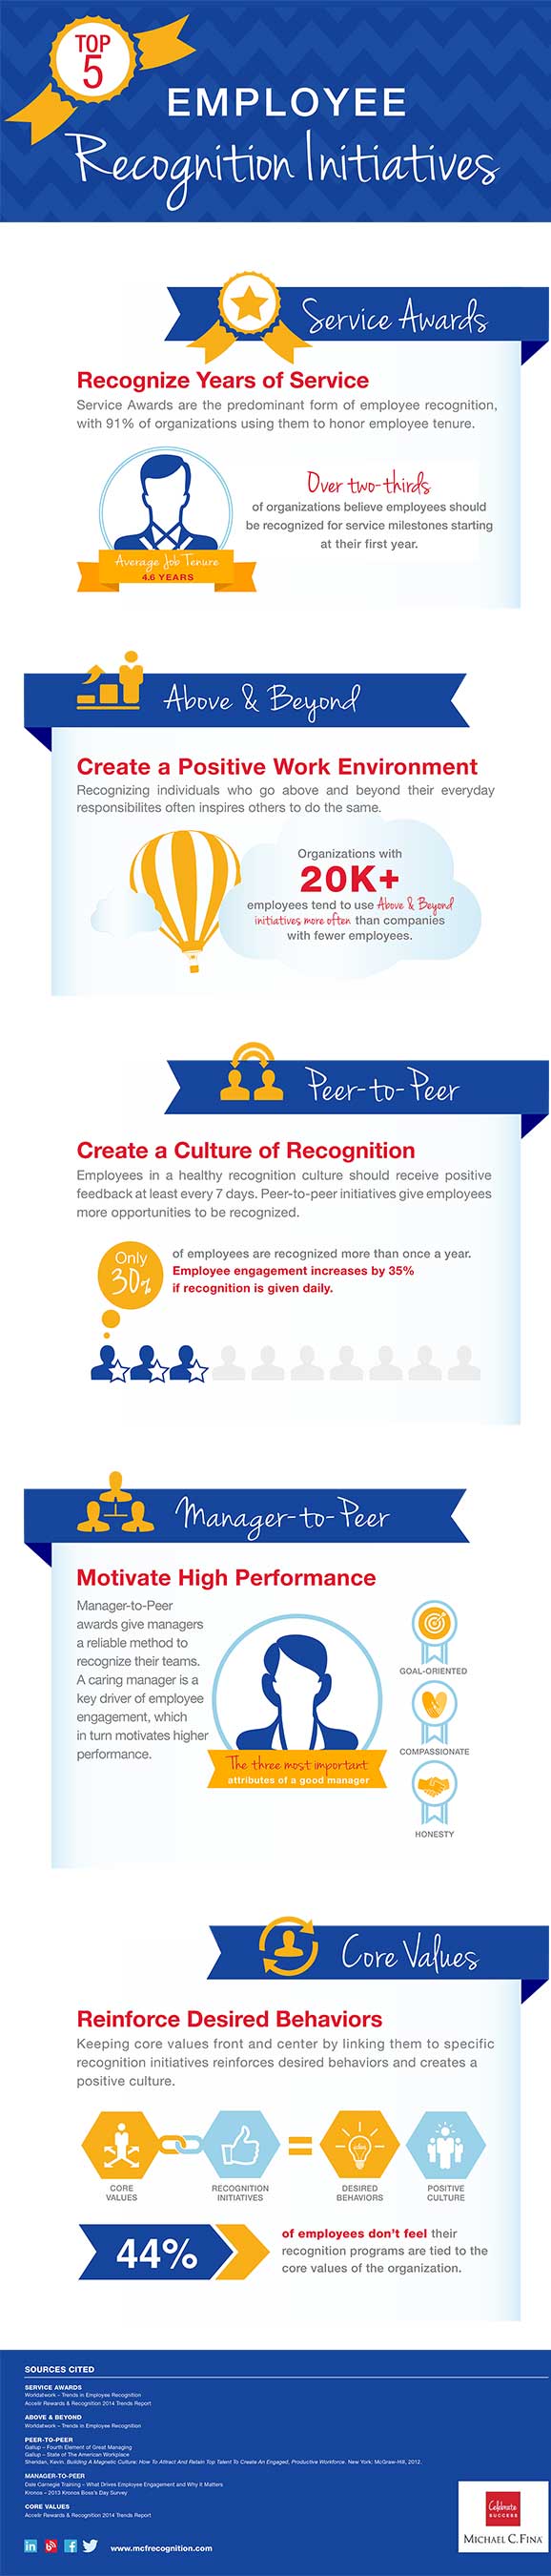 employee-recognition-initiatives